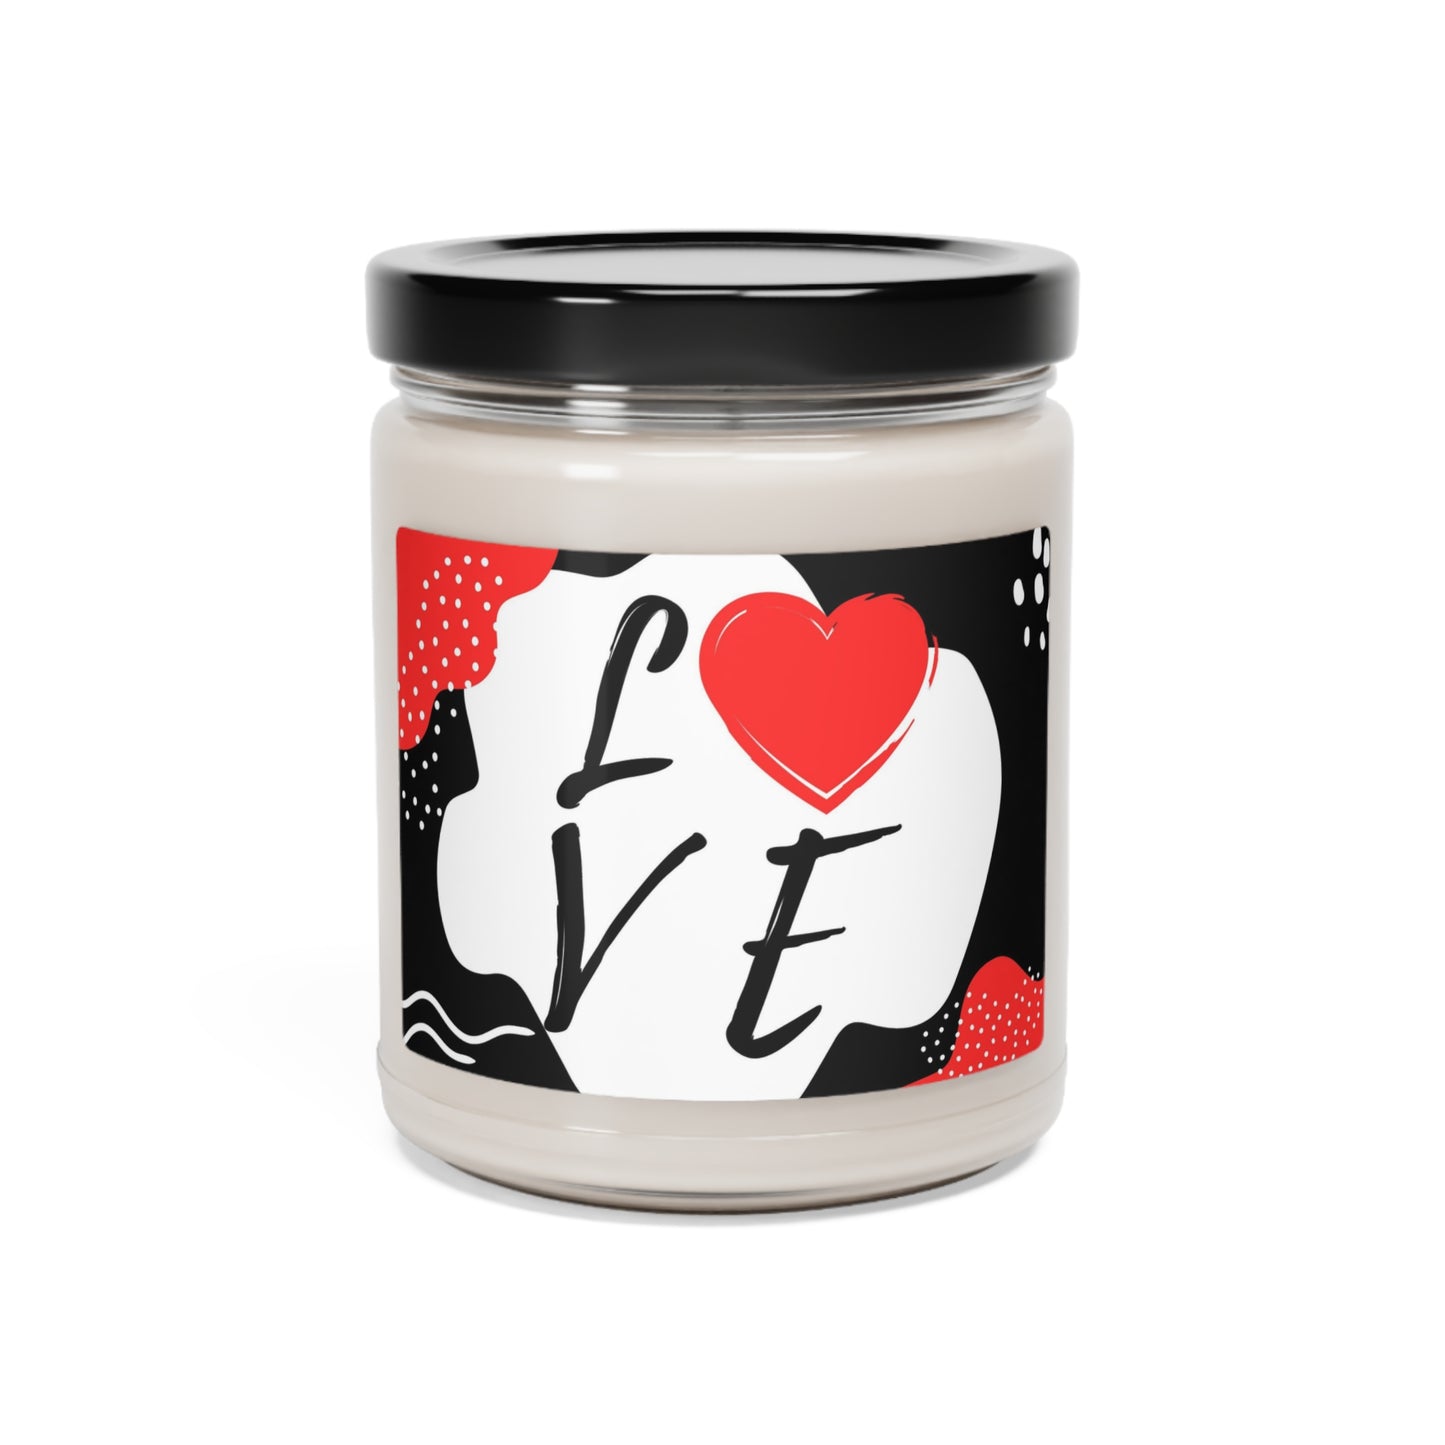 "LOVE" Scented Soy Candle, 9oz Glass Jar, Glossy Label, 5 Different Aromatic Scents To Choose From